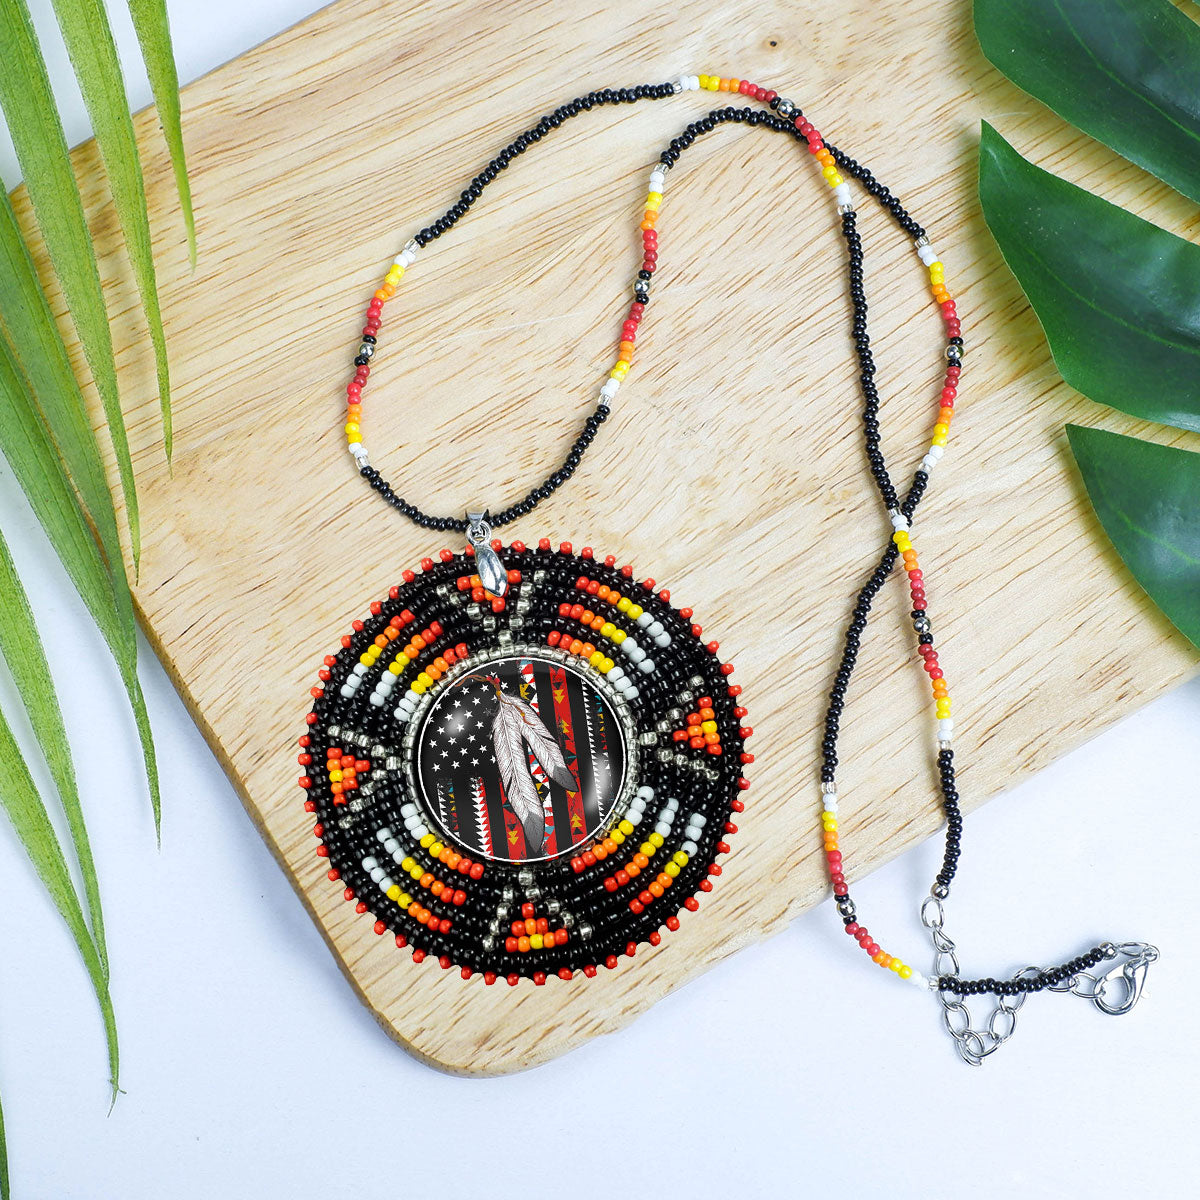 SALE 50% OFF - Native Flag Sunburst Handmade Beaded Wire Necklace Pendant Unisex With Native American Style